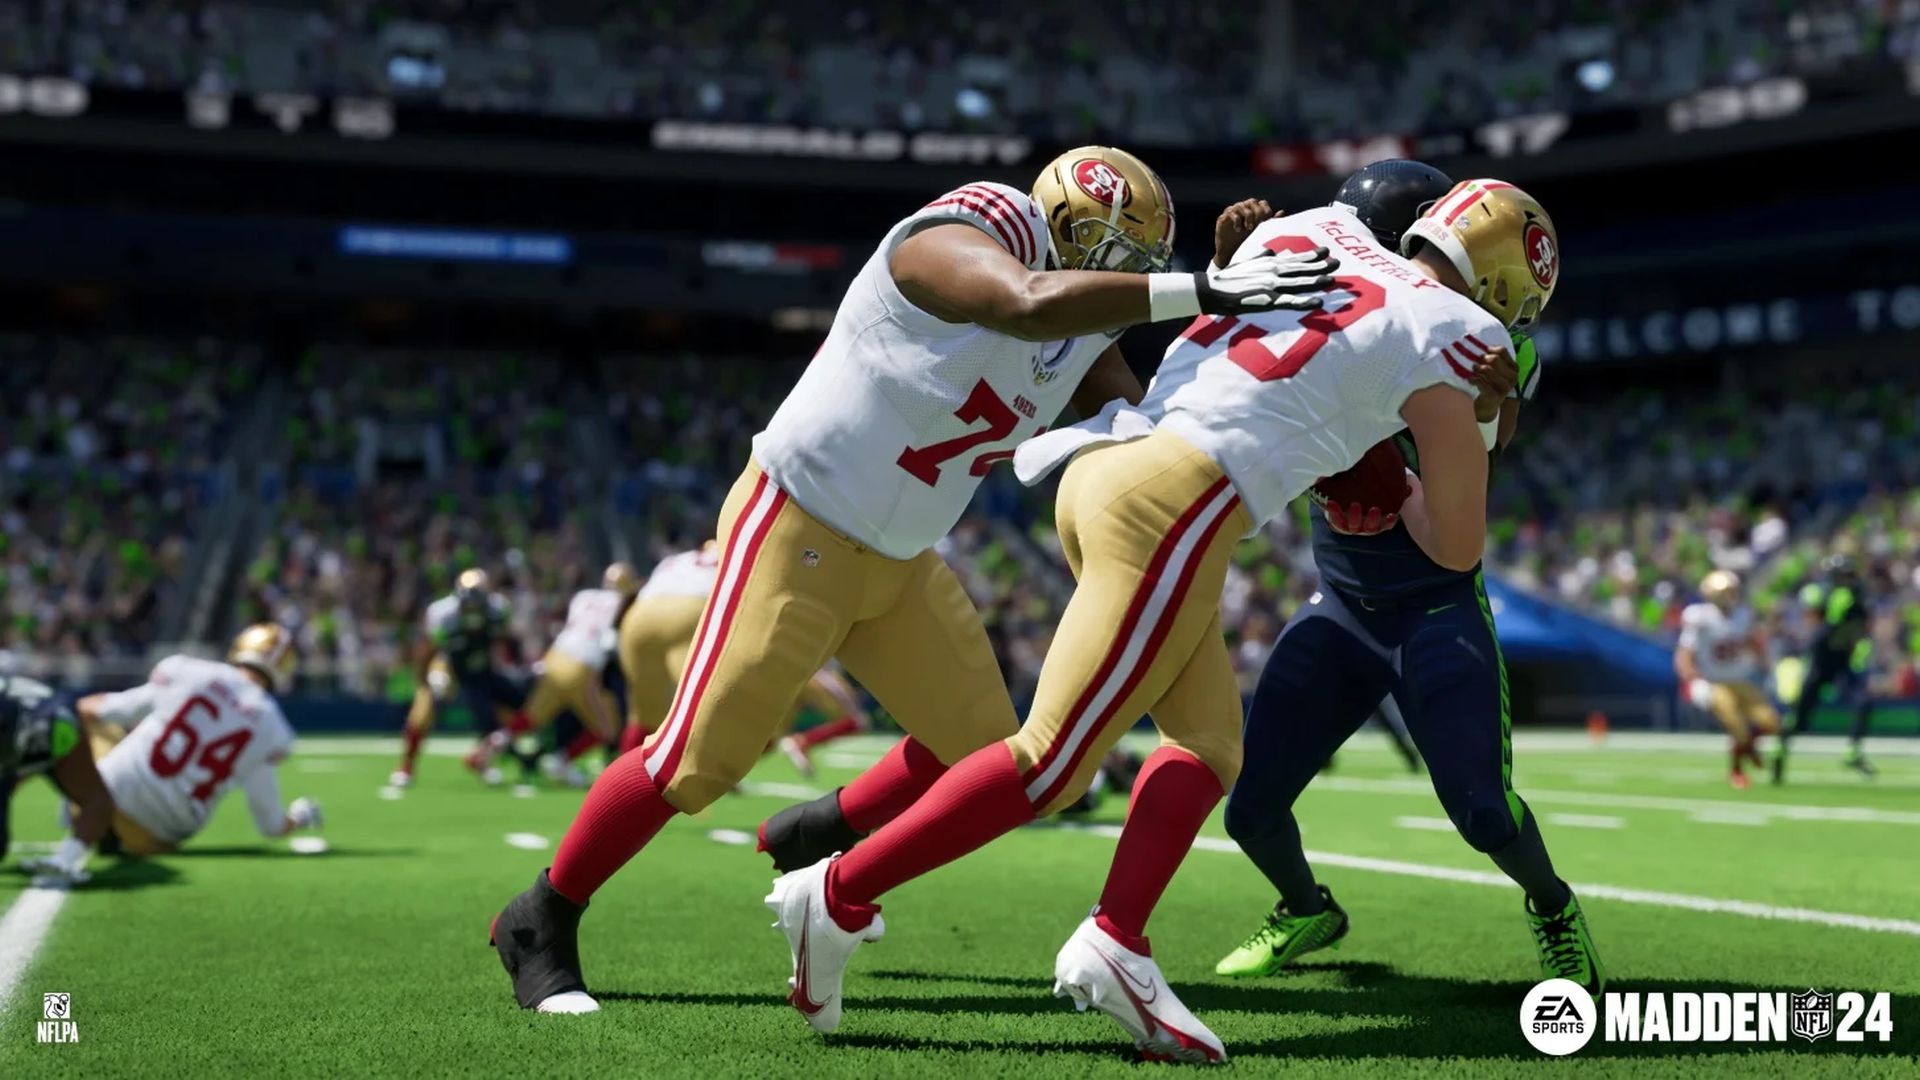 Madden NFL 24 – Everything You Need to Know